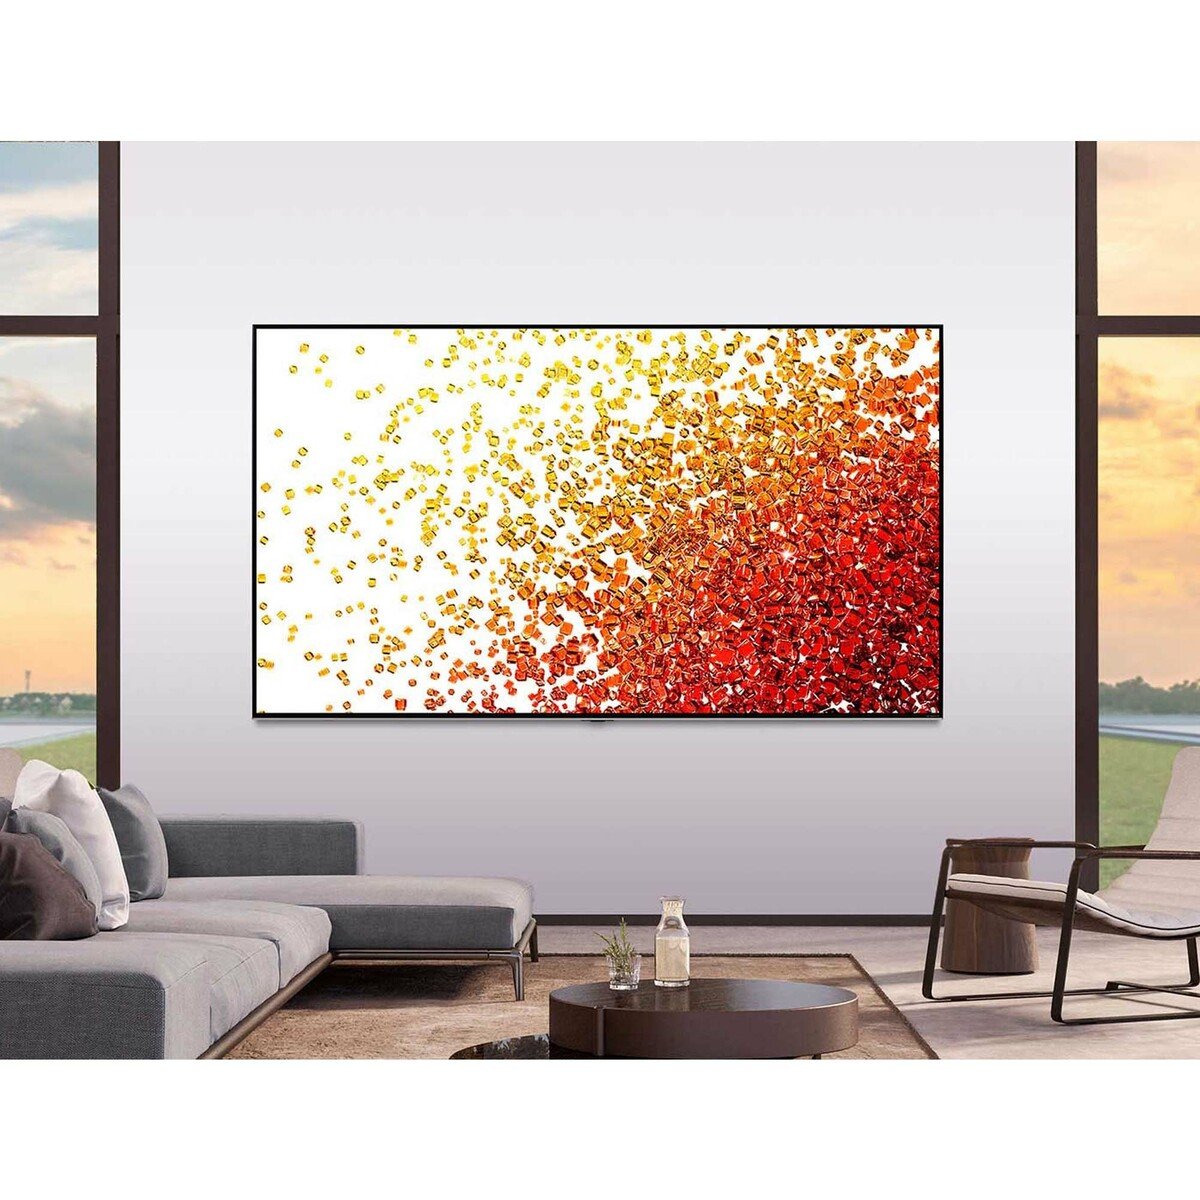 LG NanoCell TV 75 Inch NANO90 Series New 2021 Cinema Screen Design 4K Cinema HDR webOS Smart with ThinQ AI Full Array Dimming